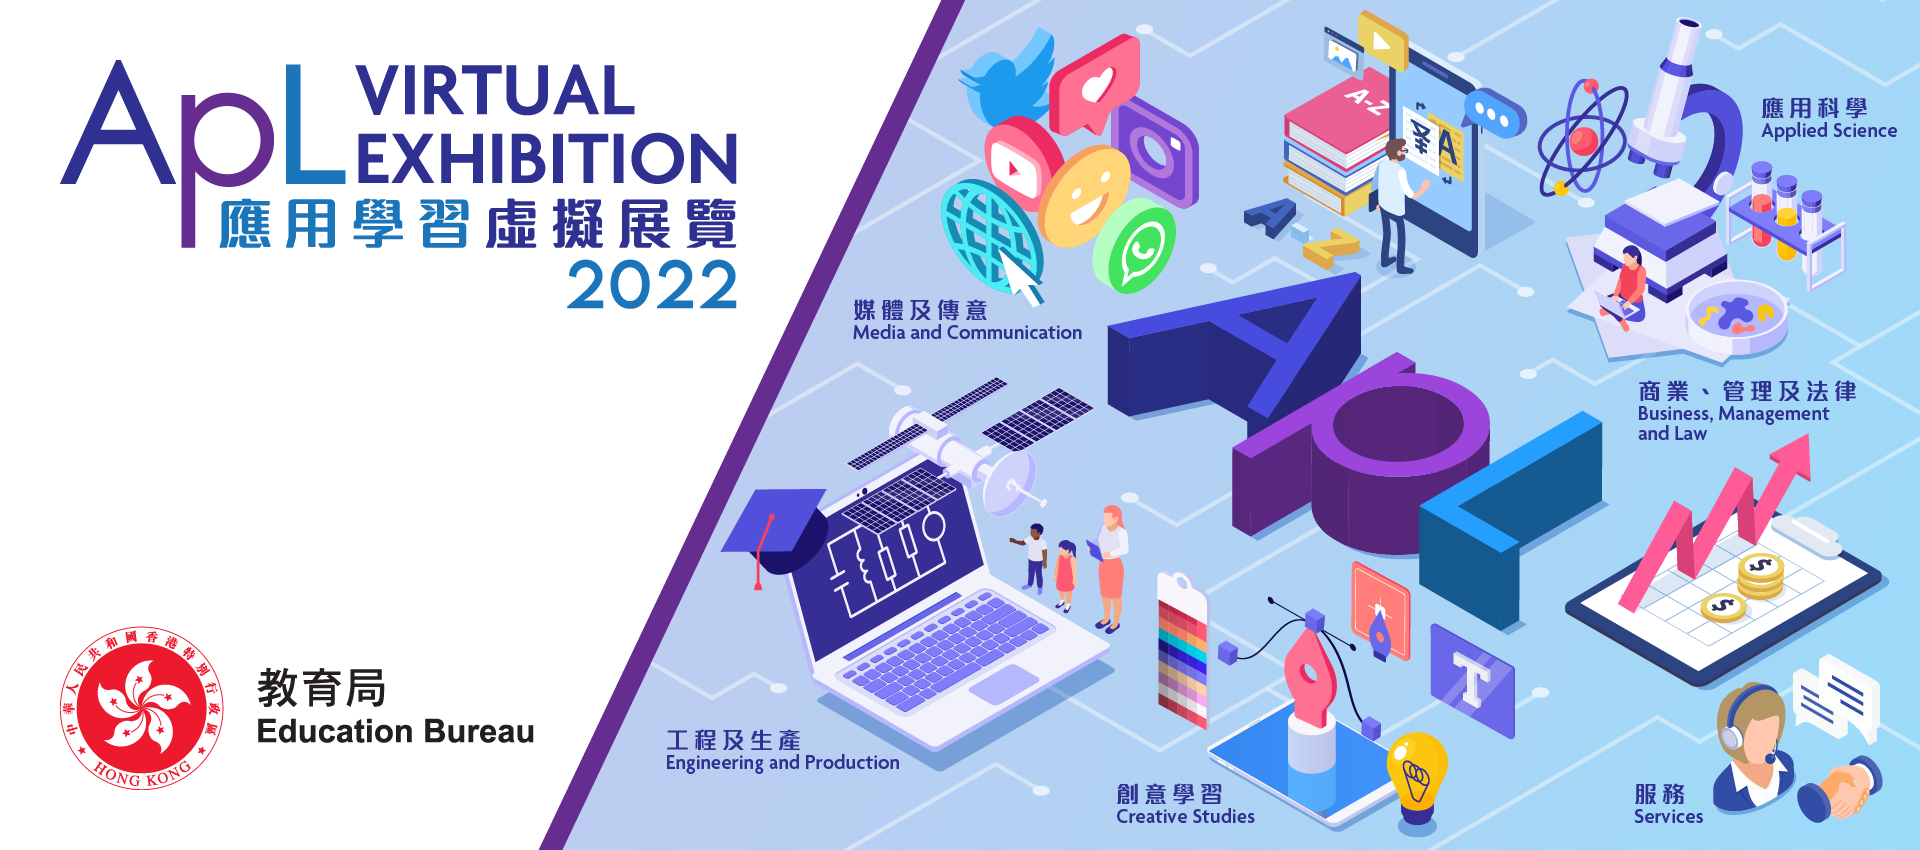 The Education Bureau and Applied Learning course providers jointly organised the "Applied Learning Virtual Exhibition 2022".